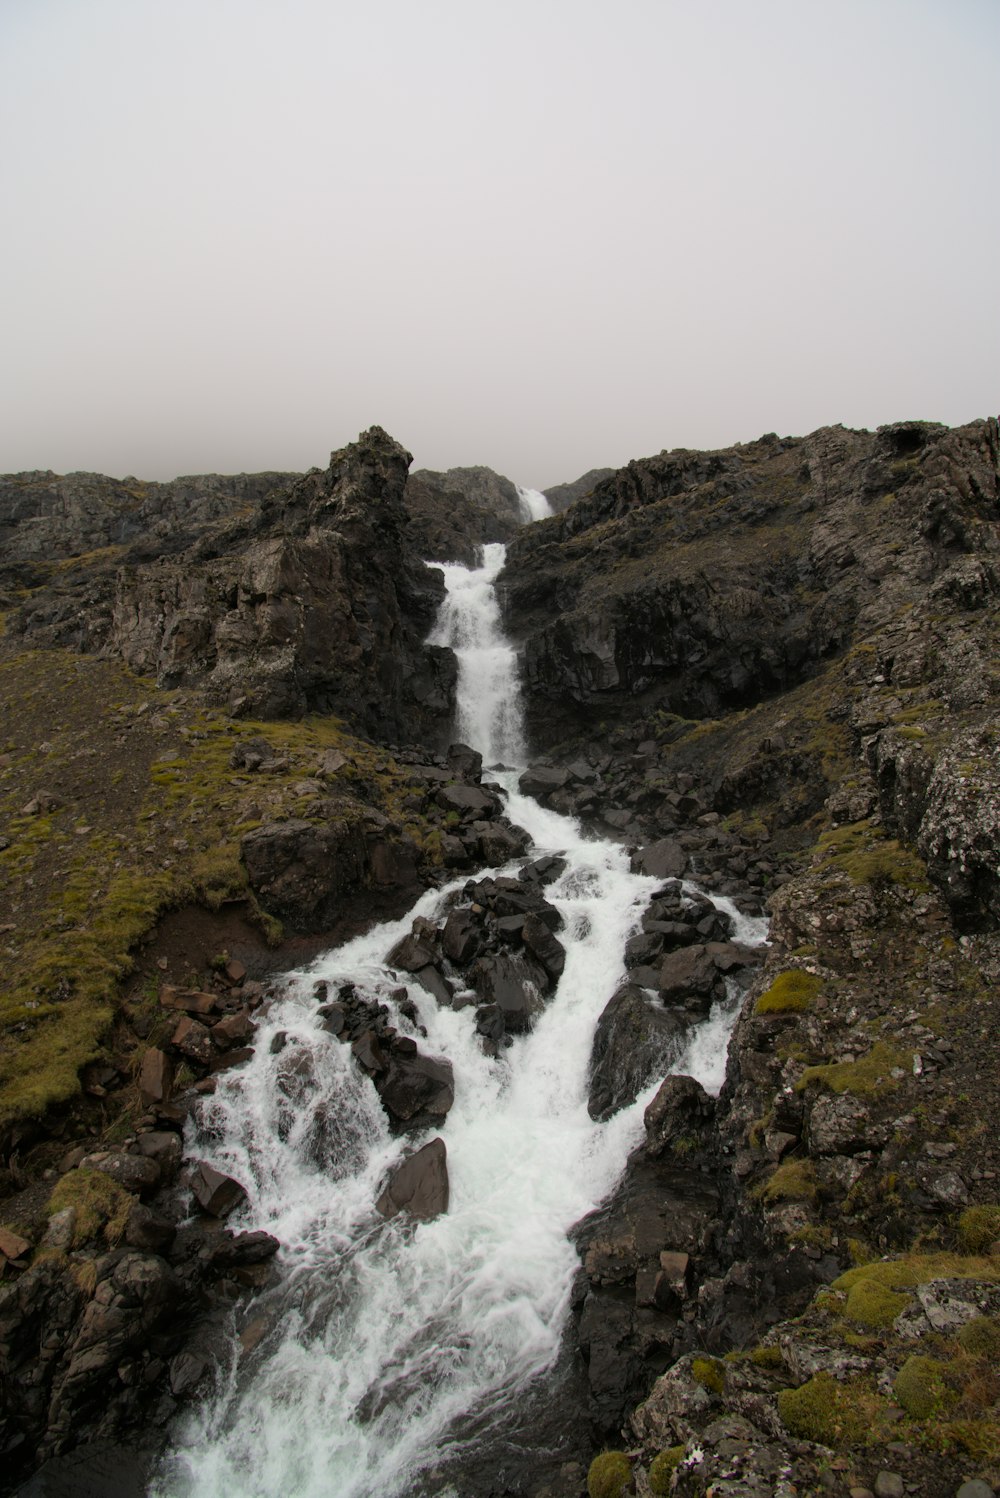 a stream of water running through a rocky area